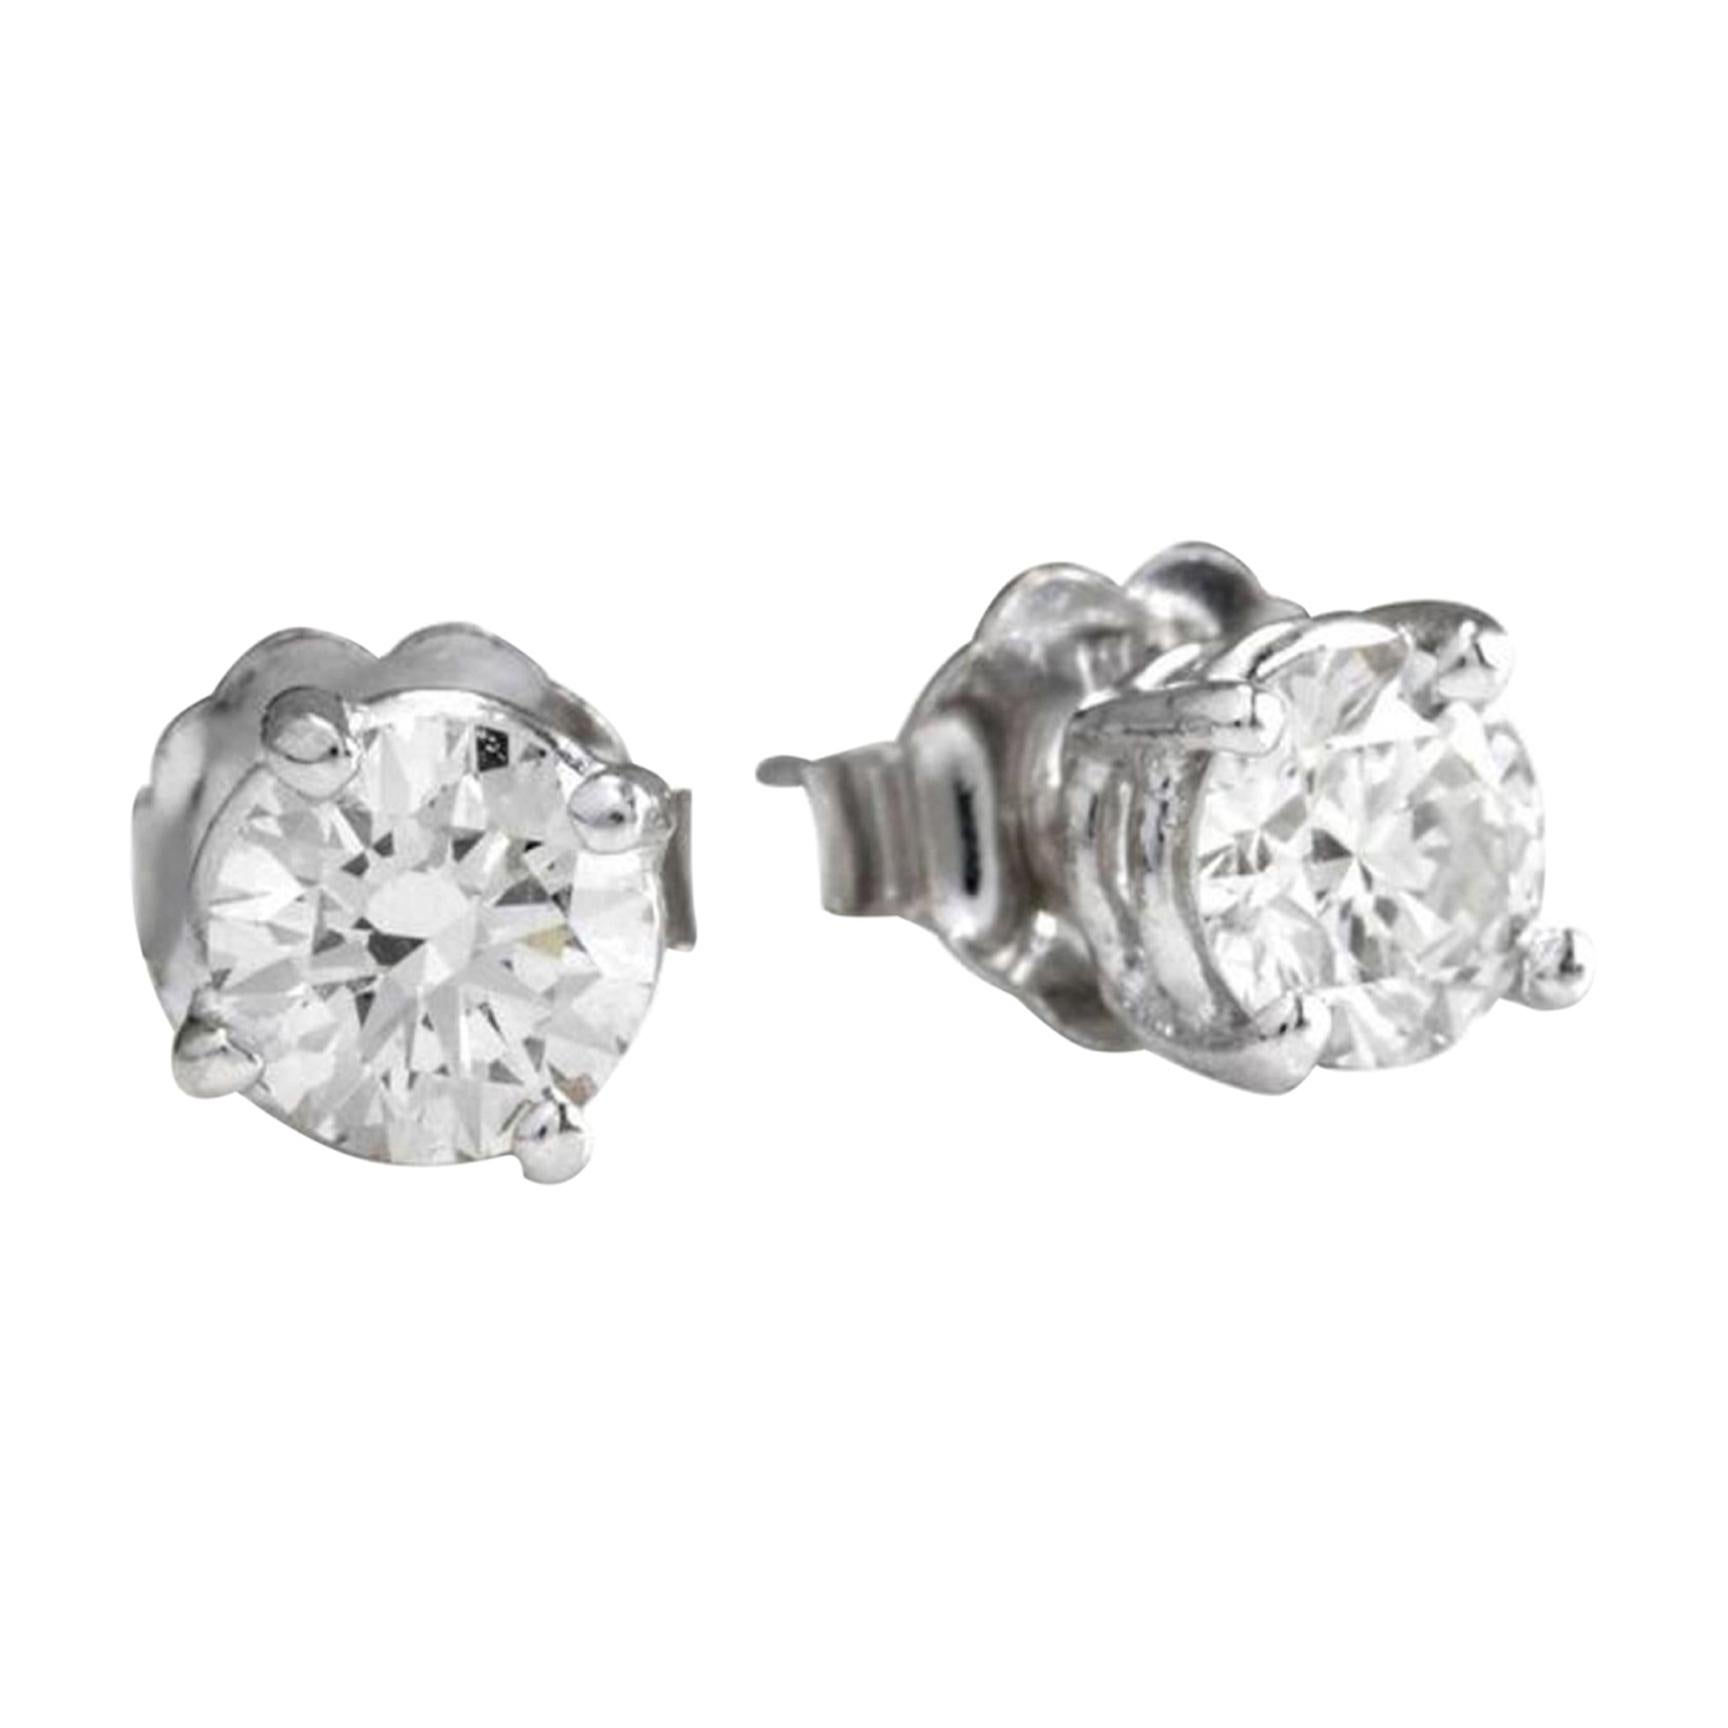 Exquisite 1.00 Carat Natural Diamond 14 Karat Solid White Gold Stud Earrings For Sale